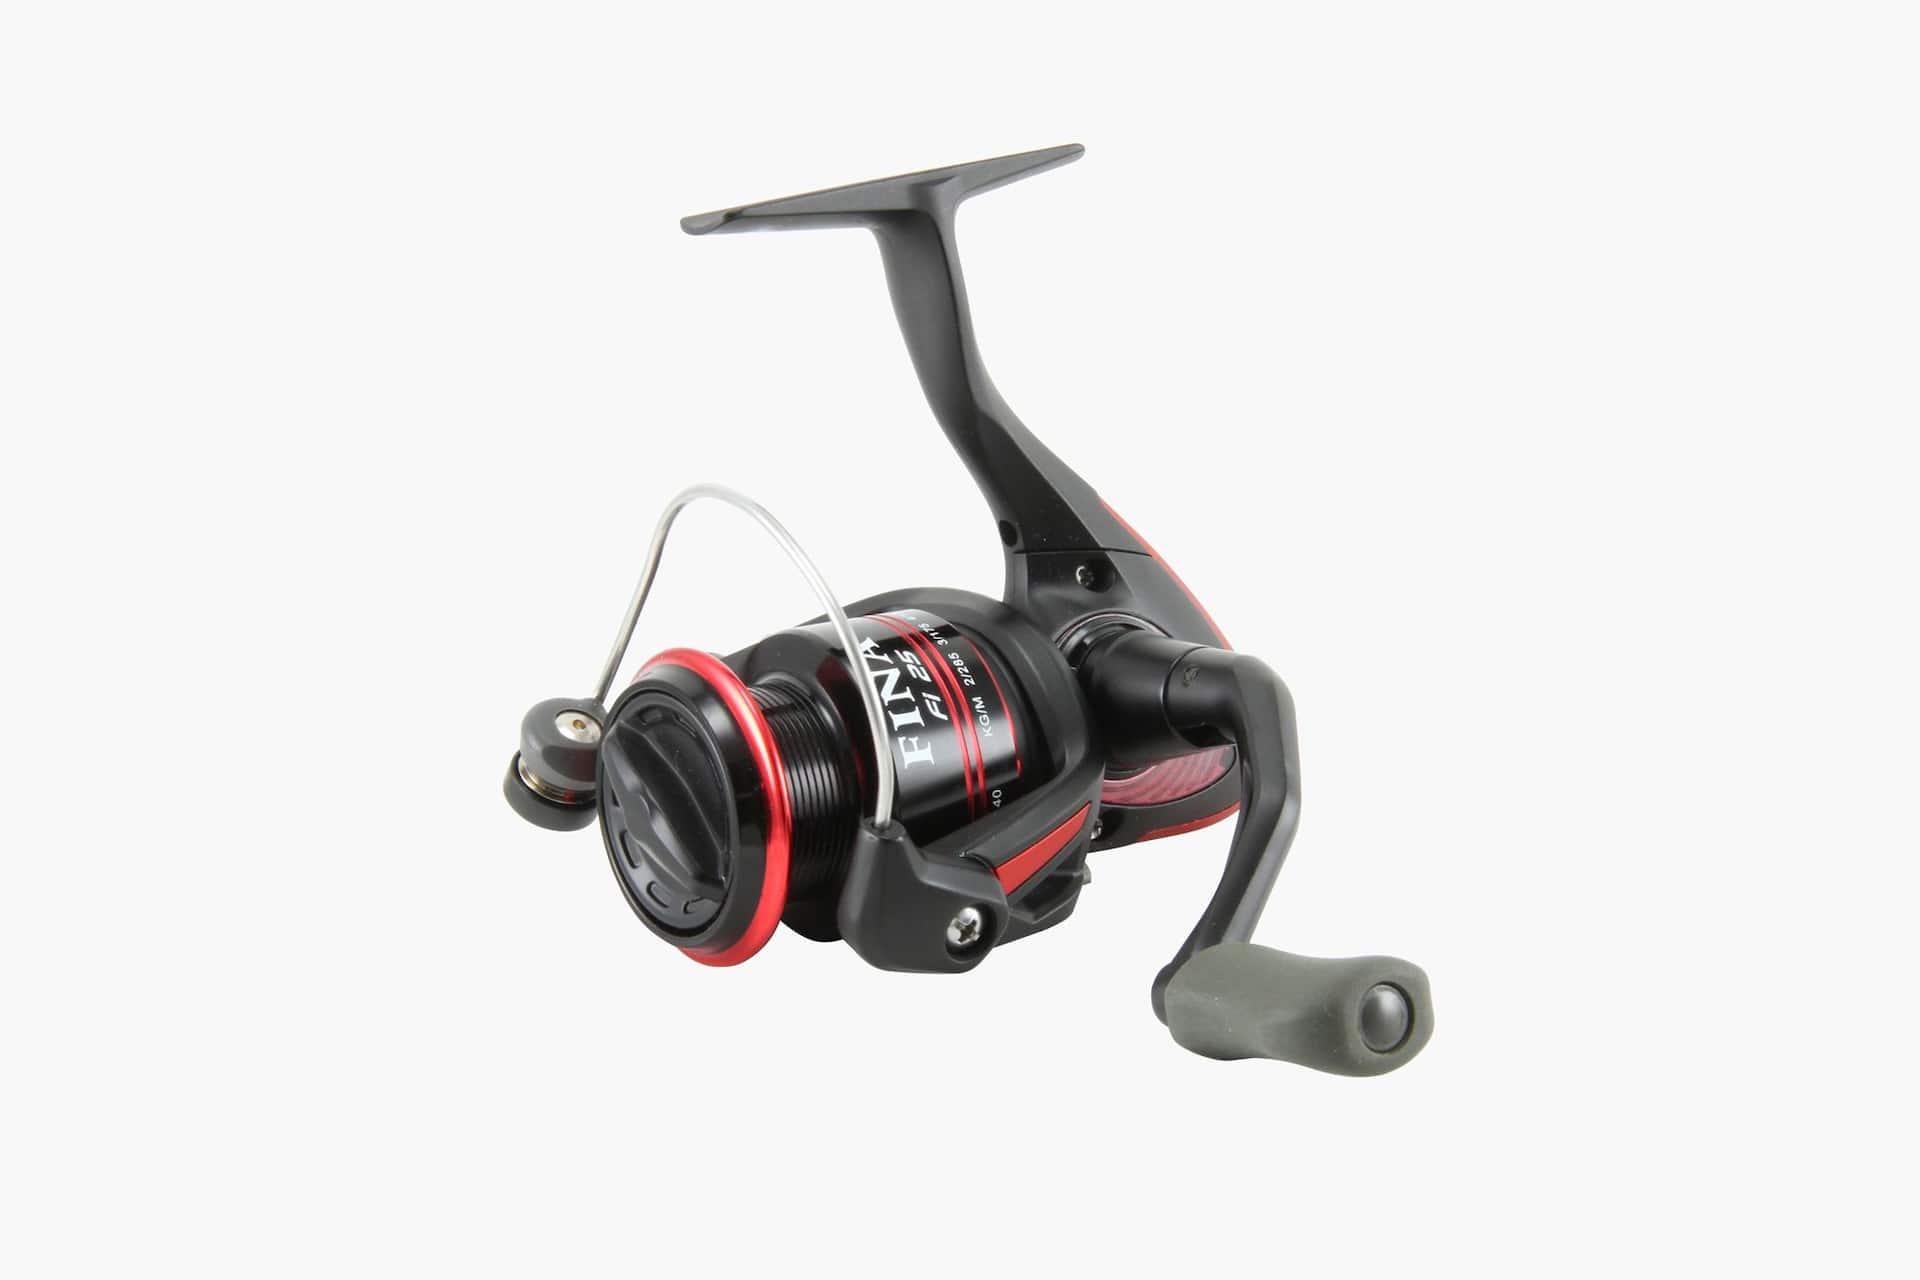 https://media-www.canadiantire.ca/product/playing/fishing/fishing-equipment/0775192/recoded-to-8992850-9d695400-2aec-45d6-8e96-f68e8d70096b-jpgrendition.jpg